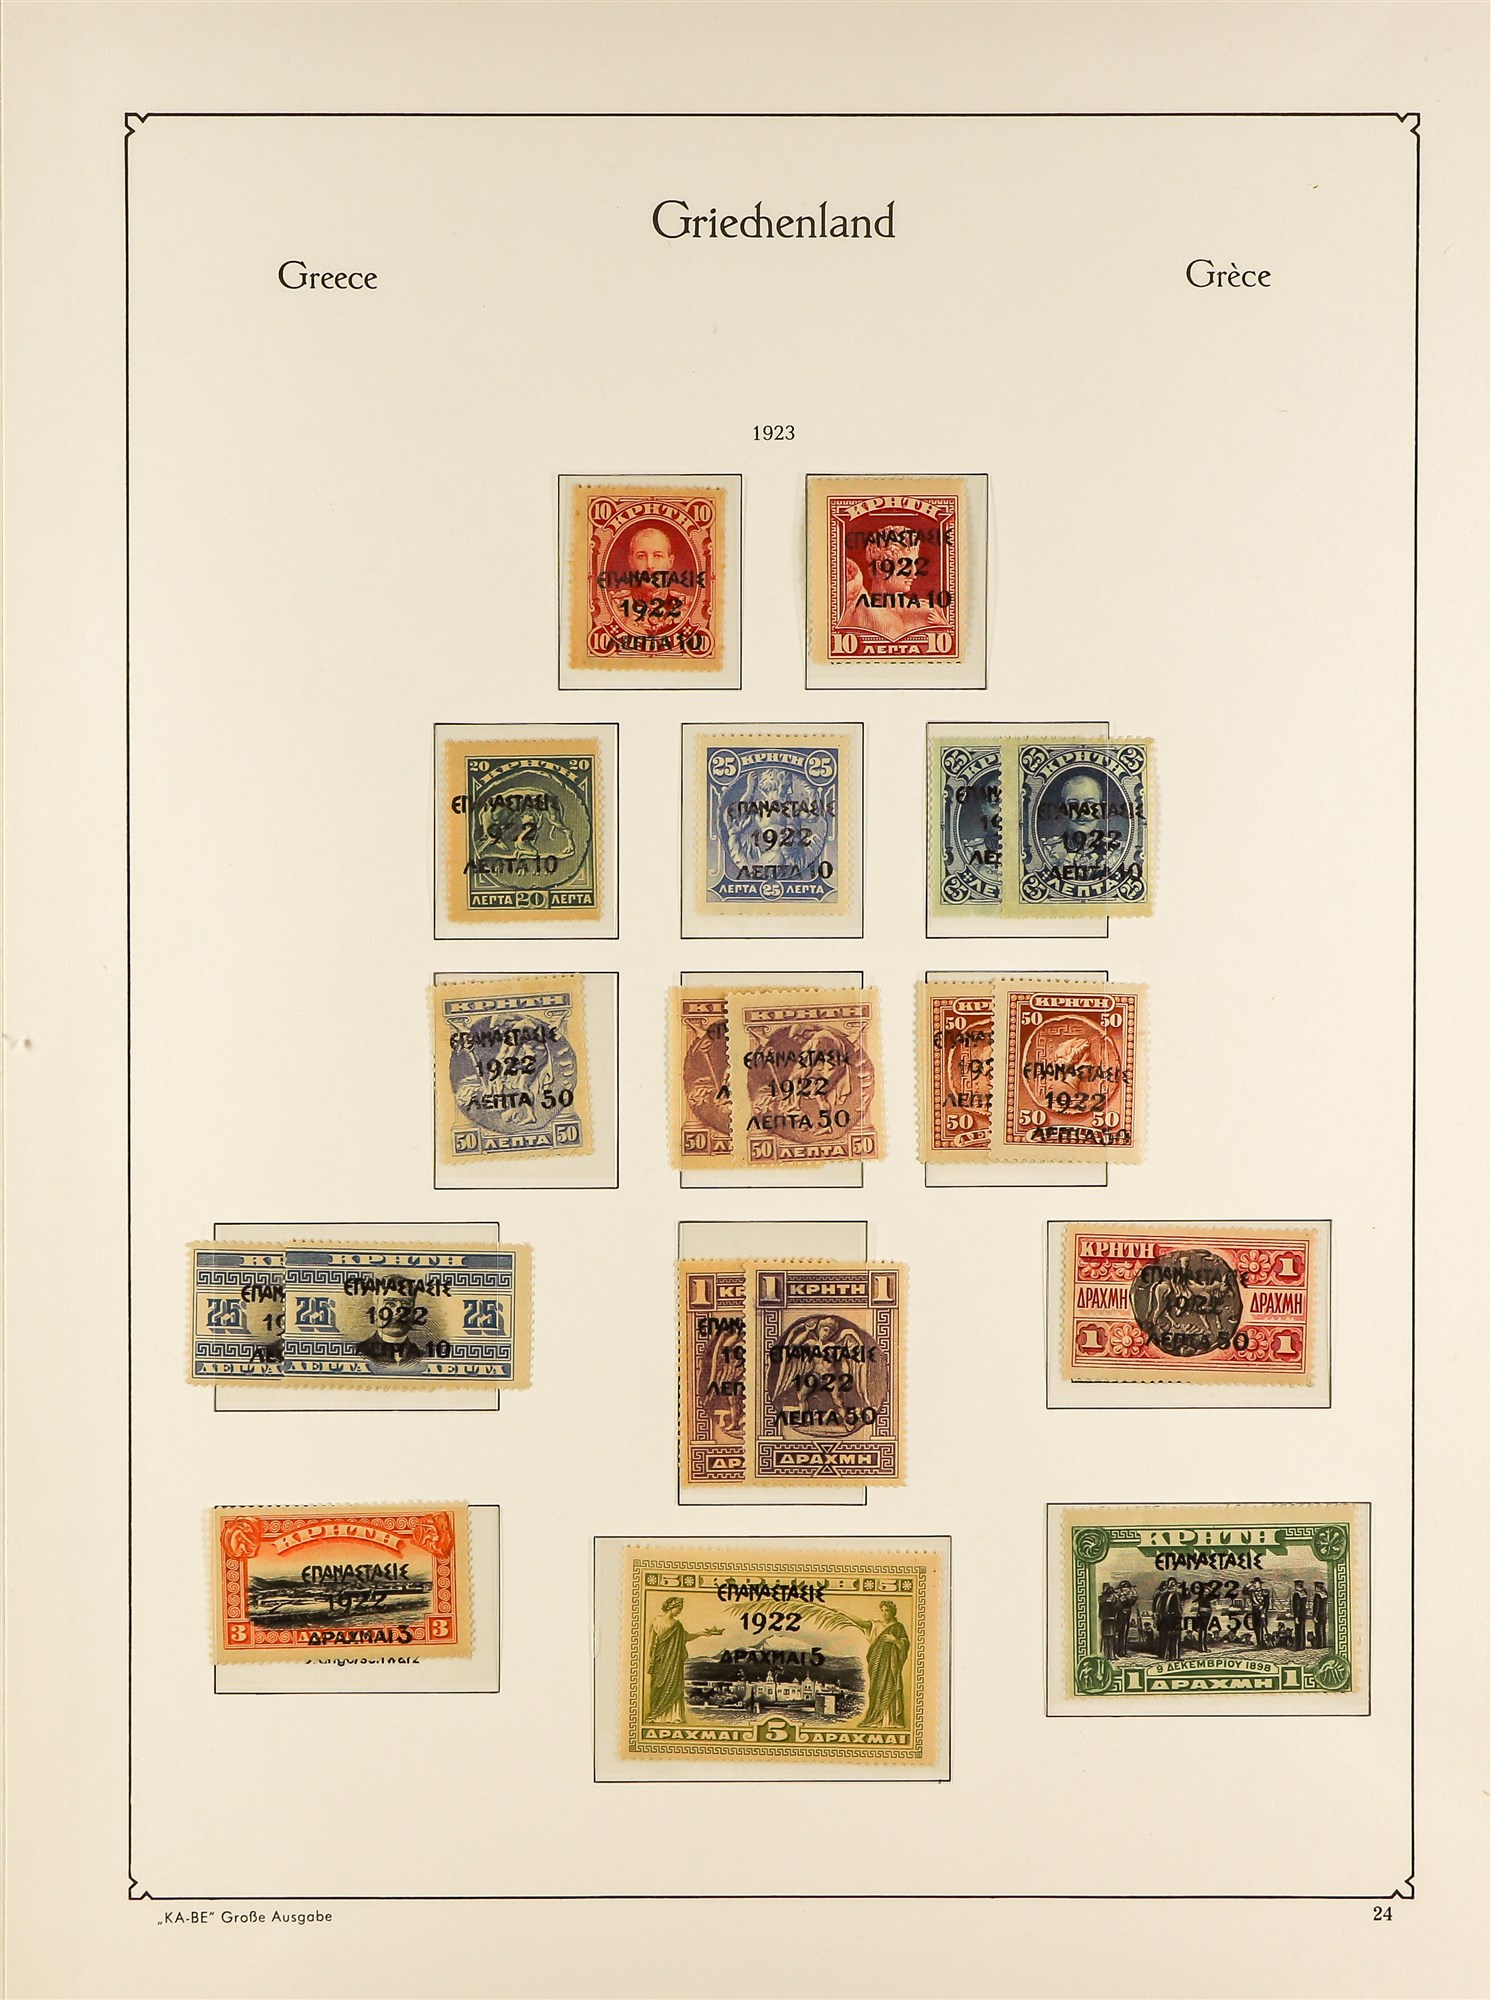 GREECE 1901 - 1930 MINT COLLECTION of 200+ stamps on Ka-Be hingeless album pages, comprehensive incl - Image 9 of 14